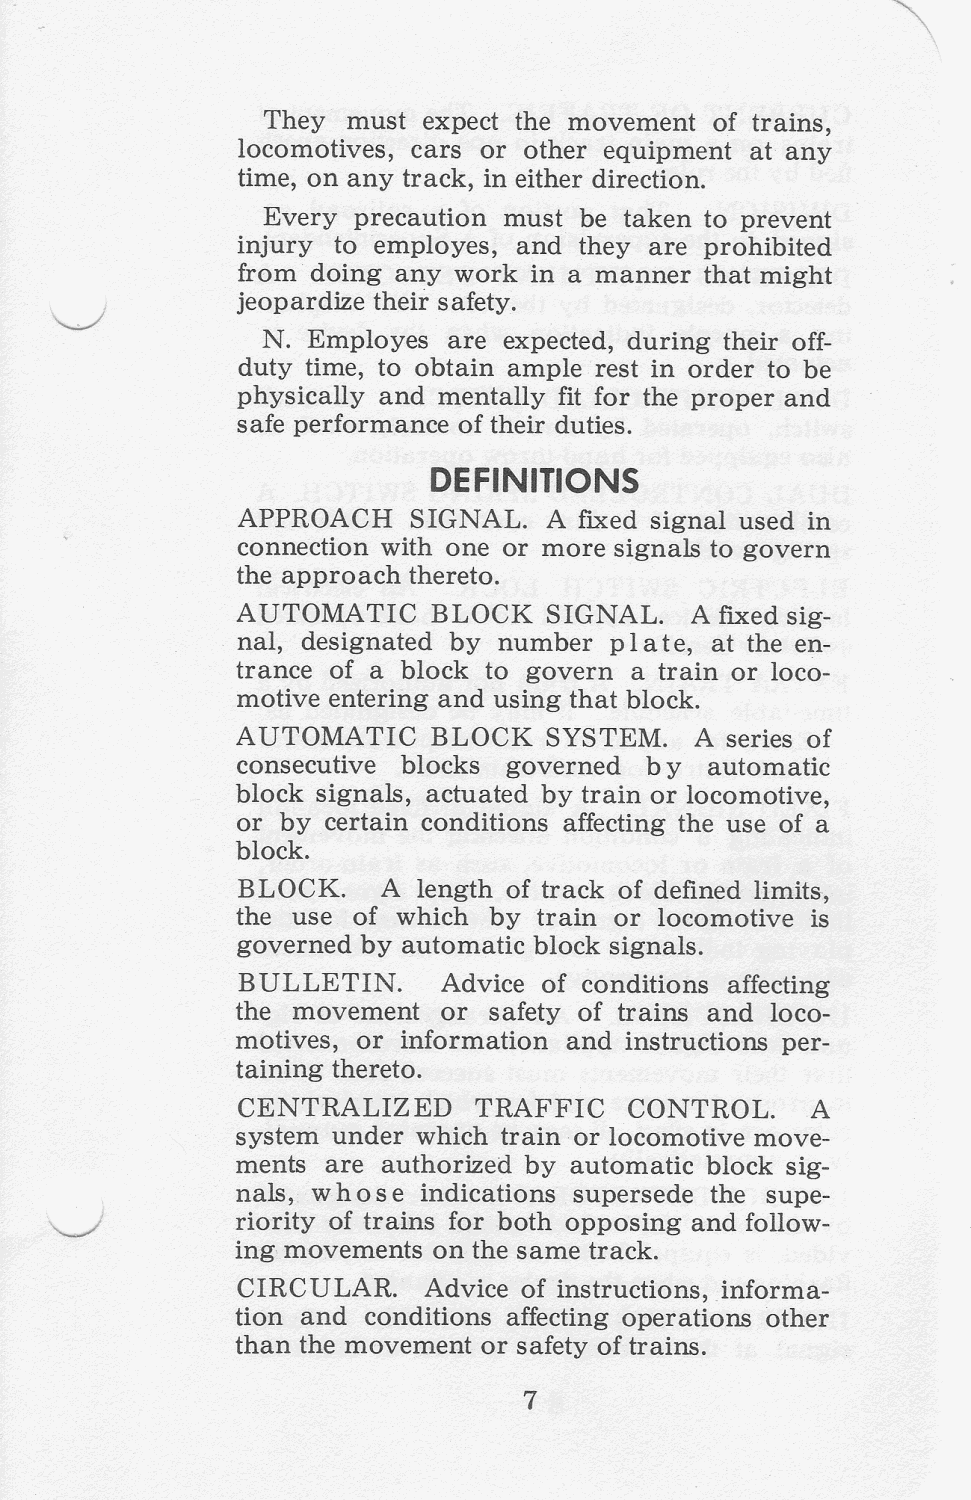 drgw_rules_1965_p007.png